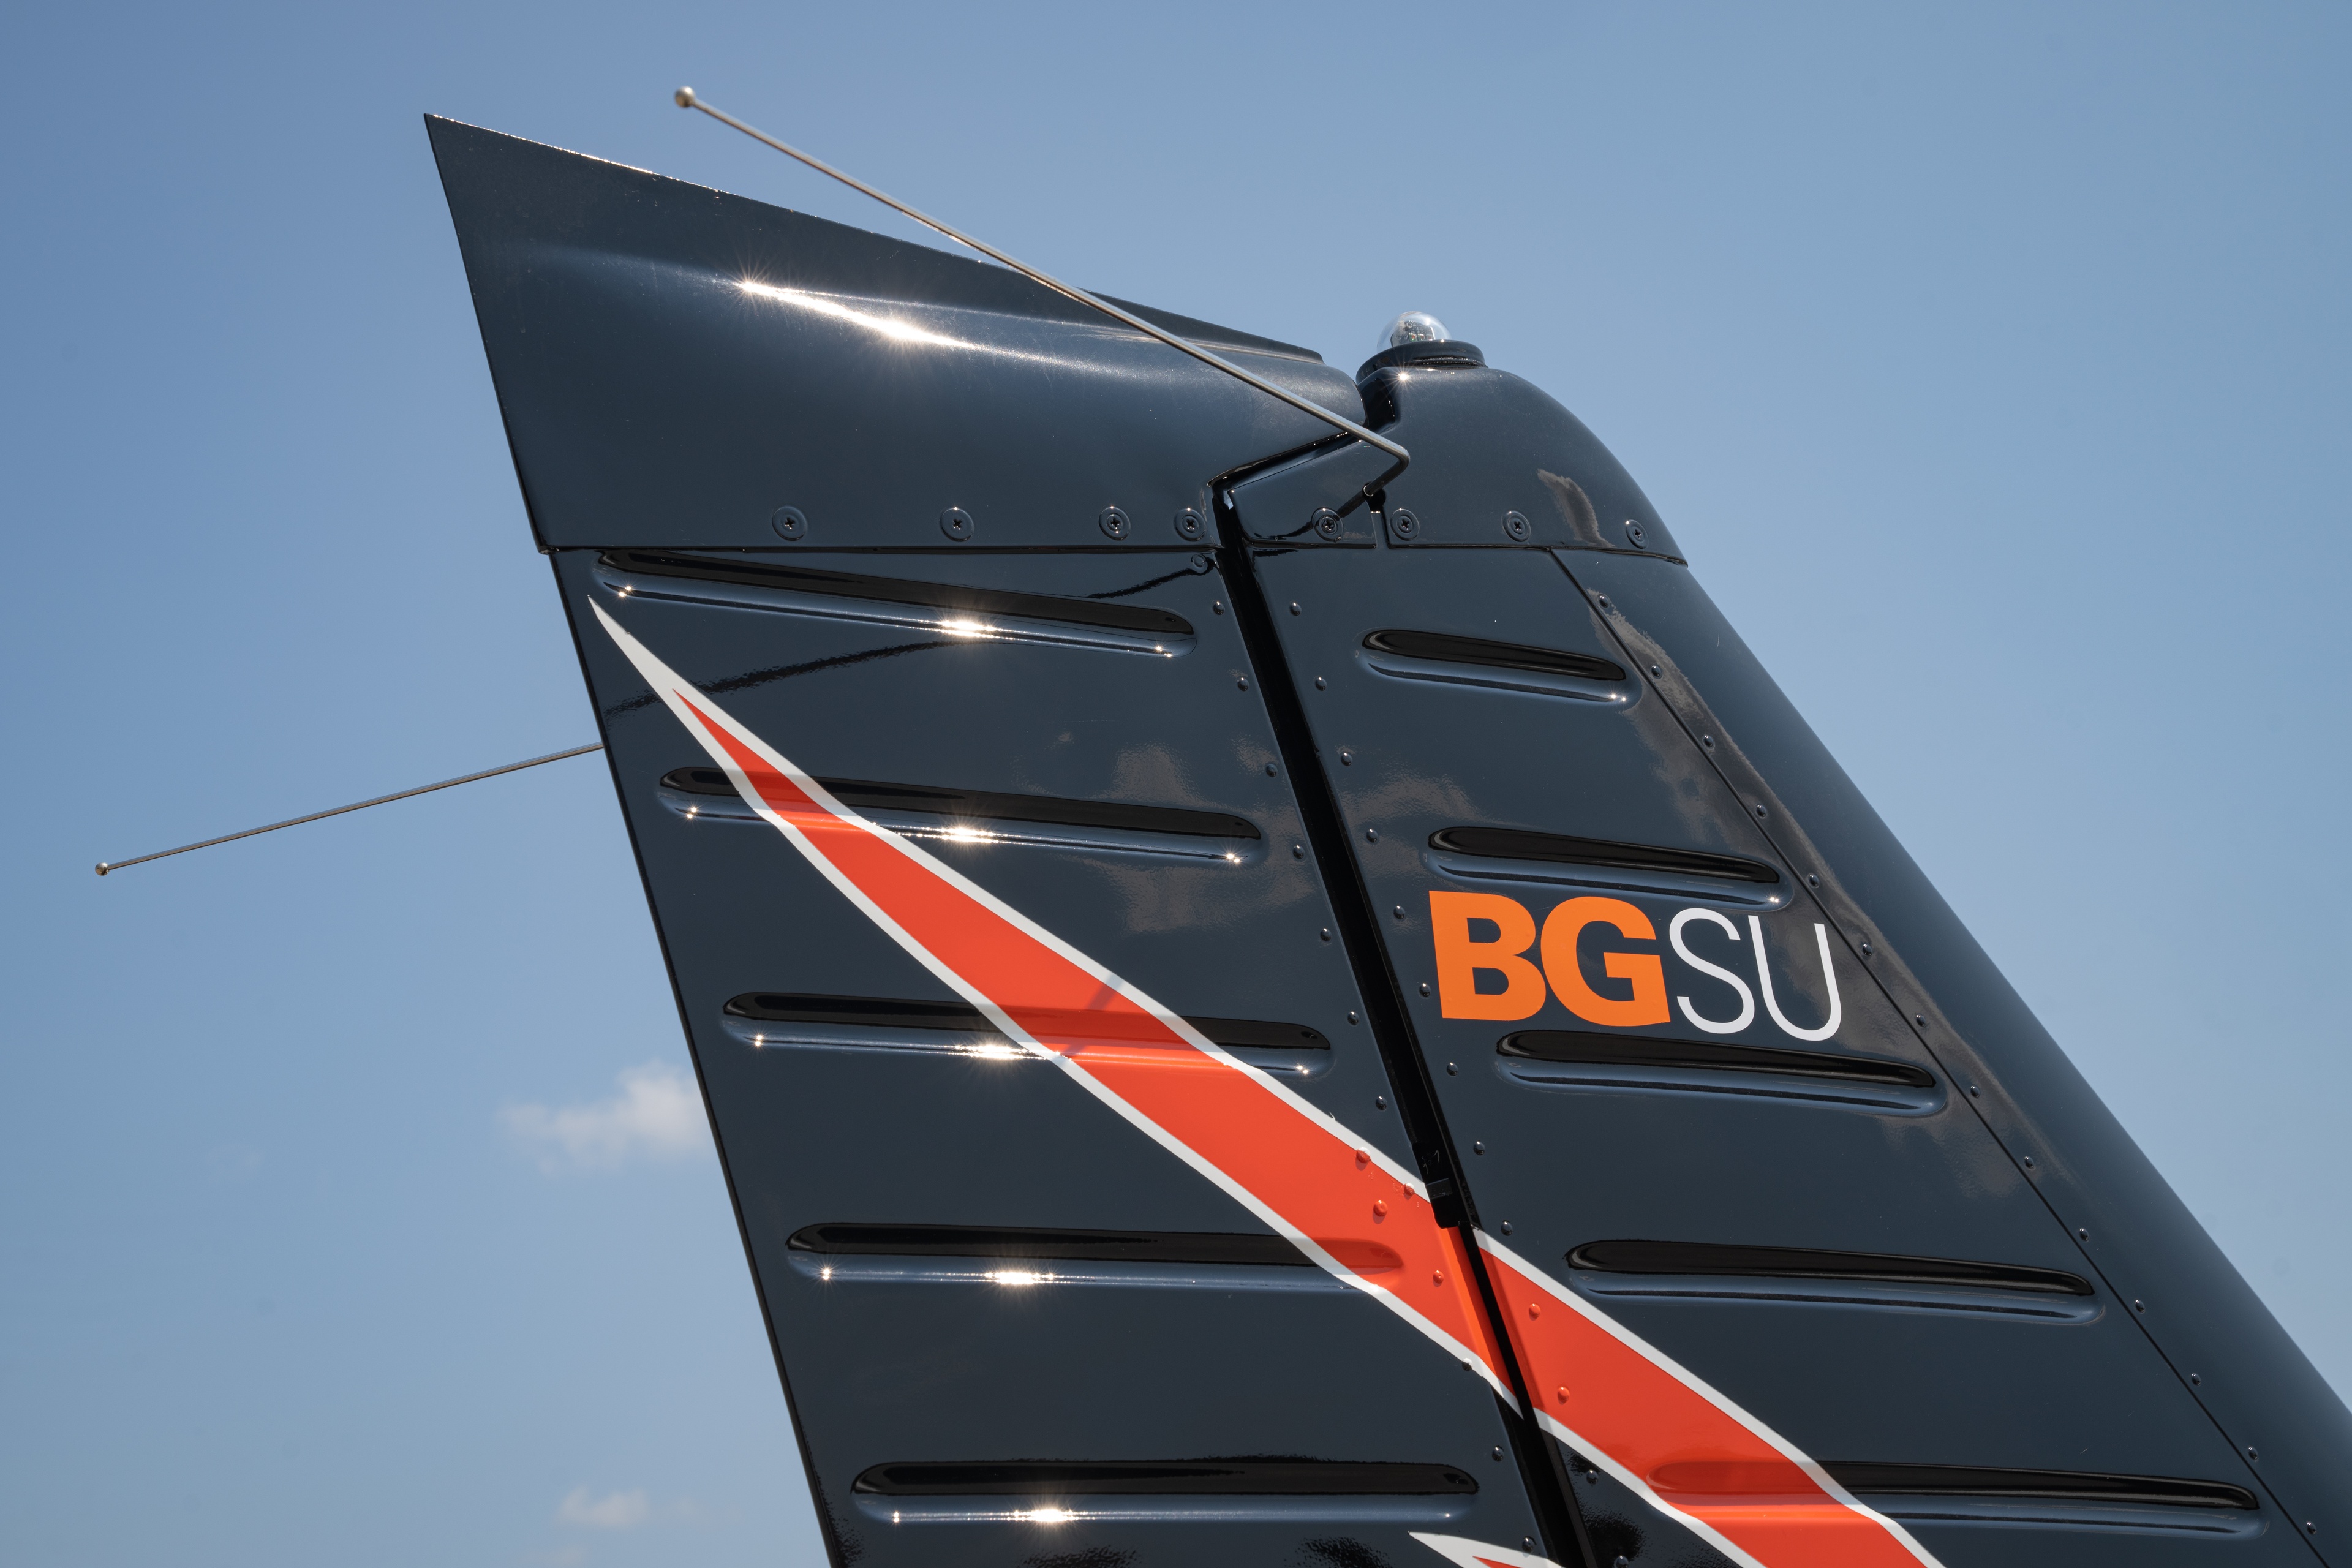 Close-up of an airplane tail with a BGSU logo